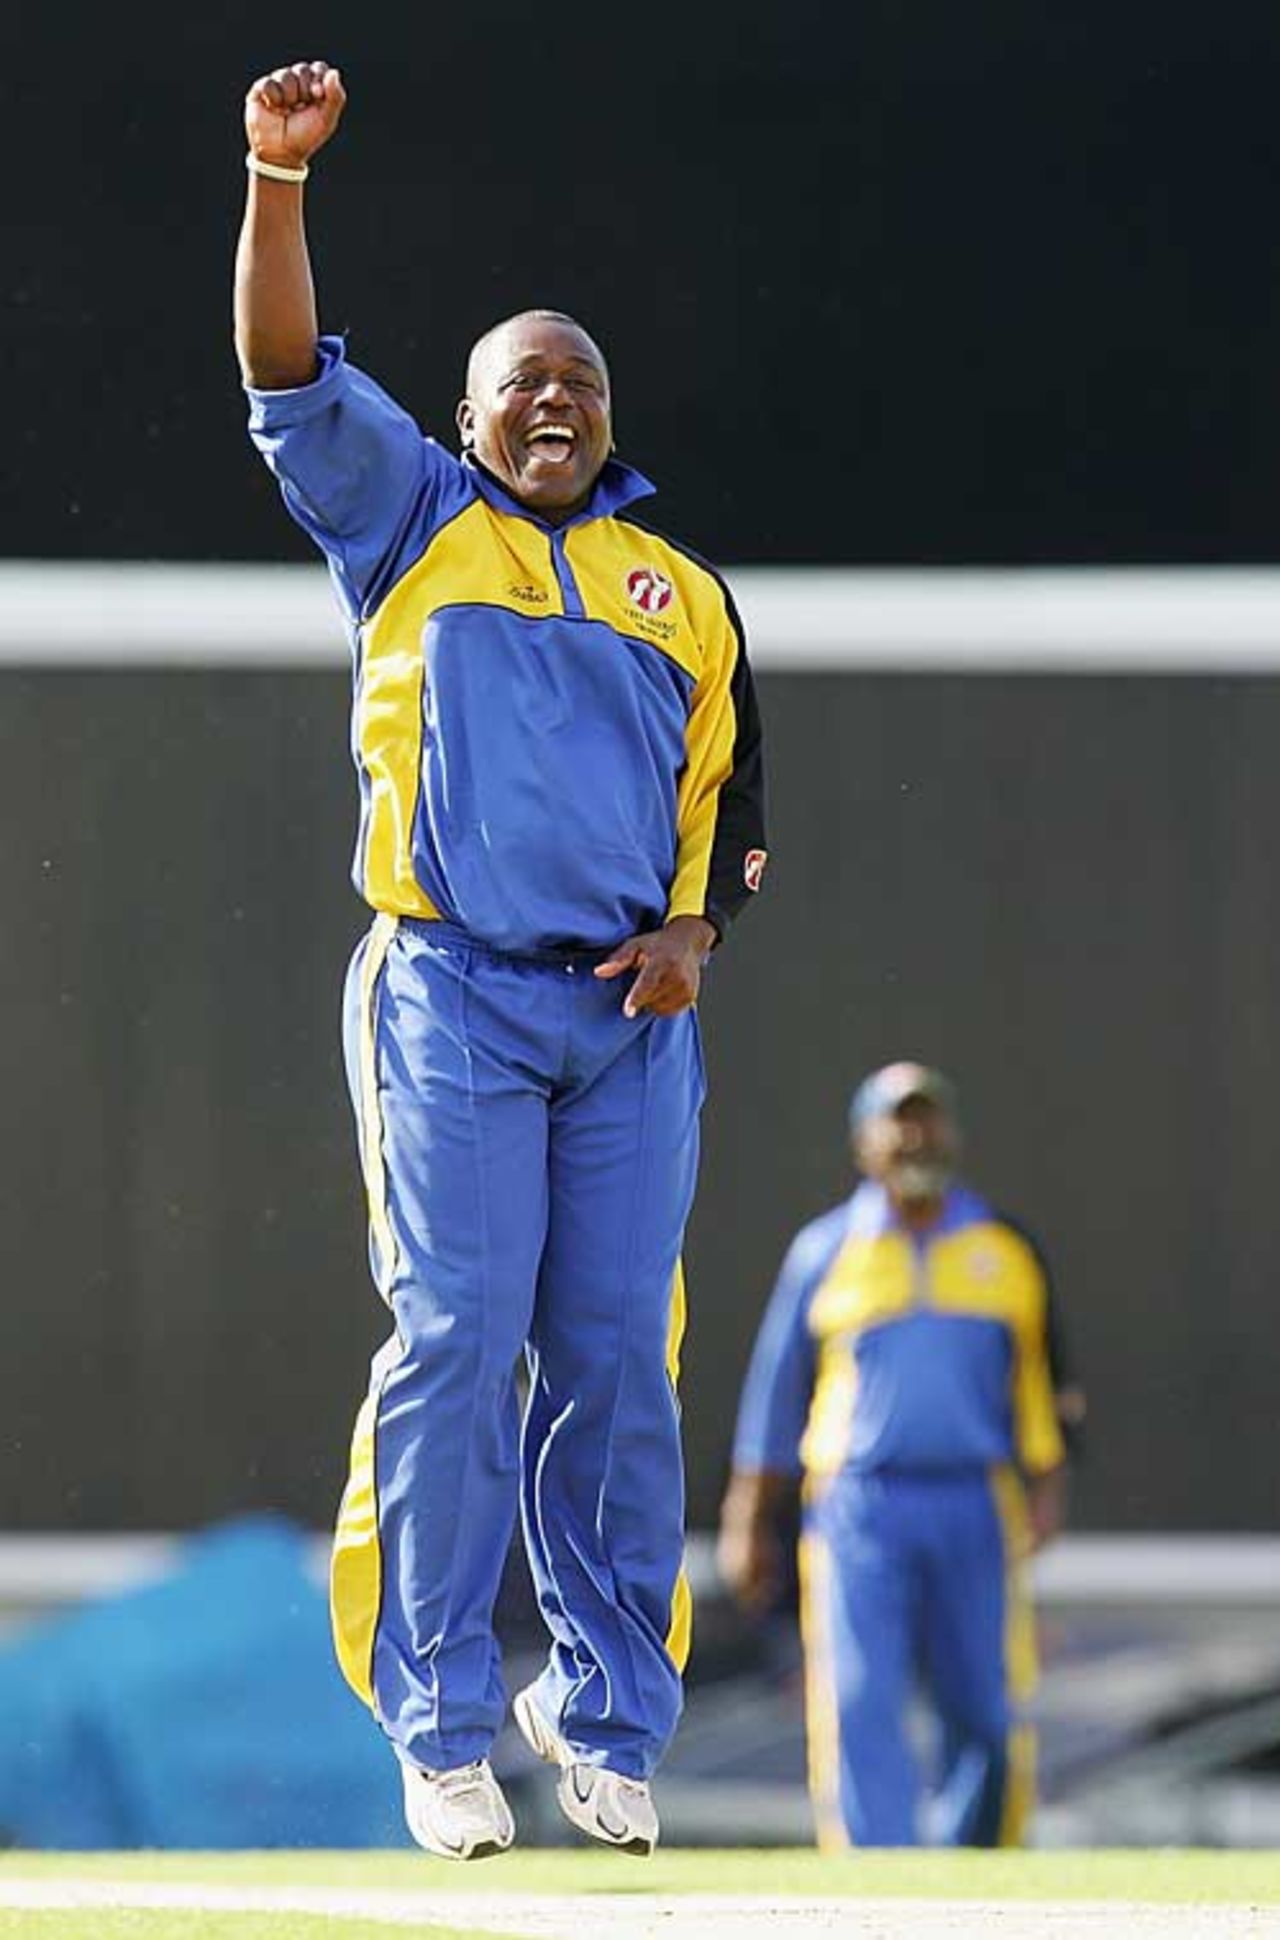 Desmond Haynes lets out an appeal, PCA Masters v Barbados Masters, The Oval, June 8, 2008